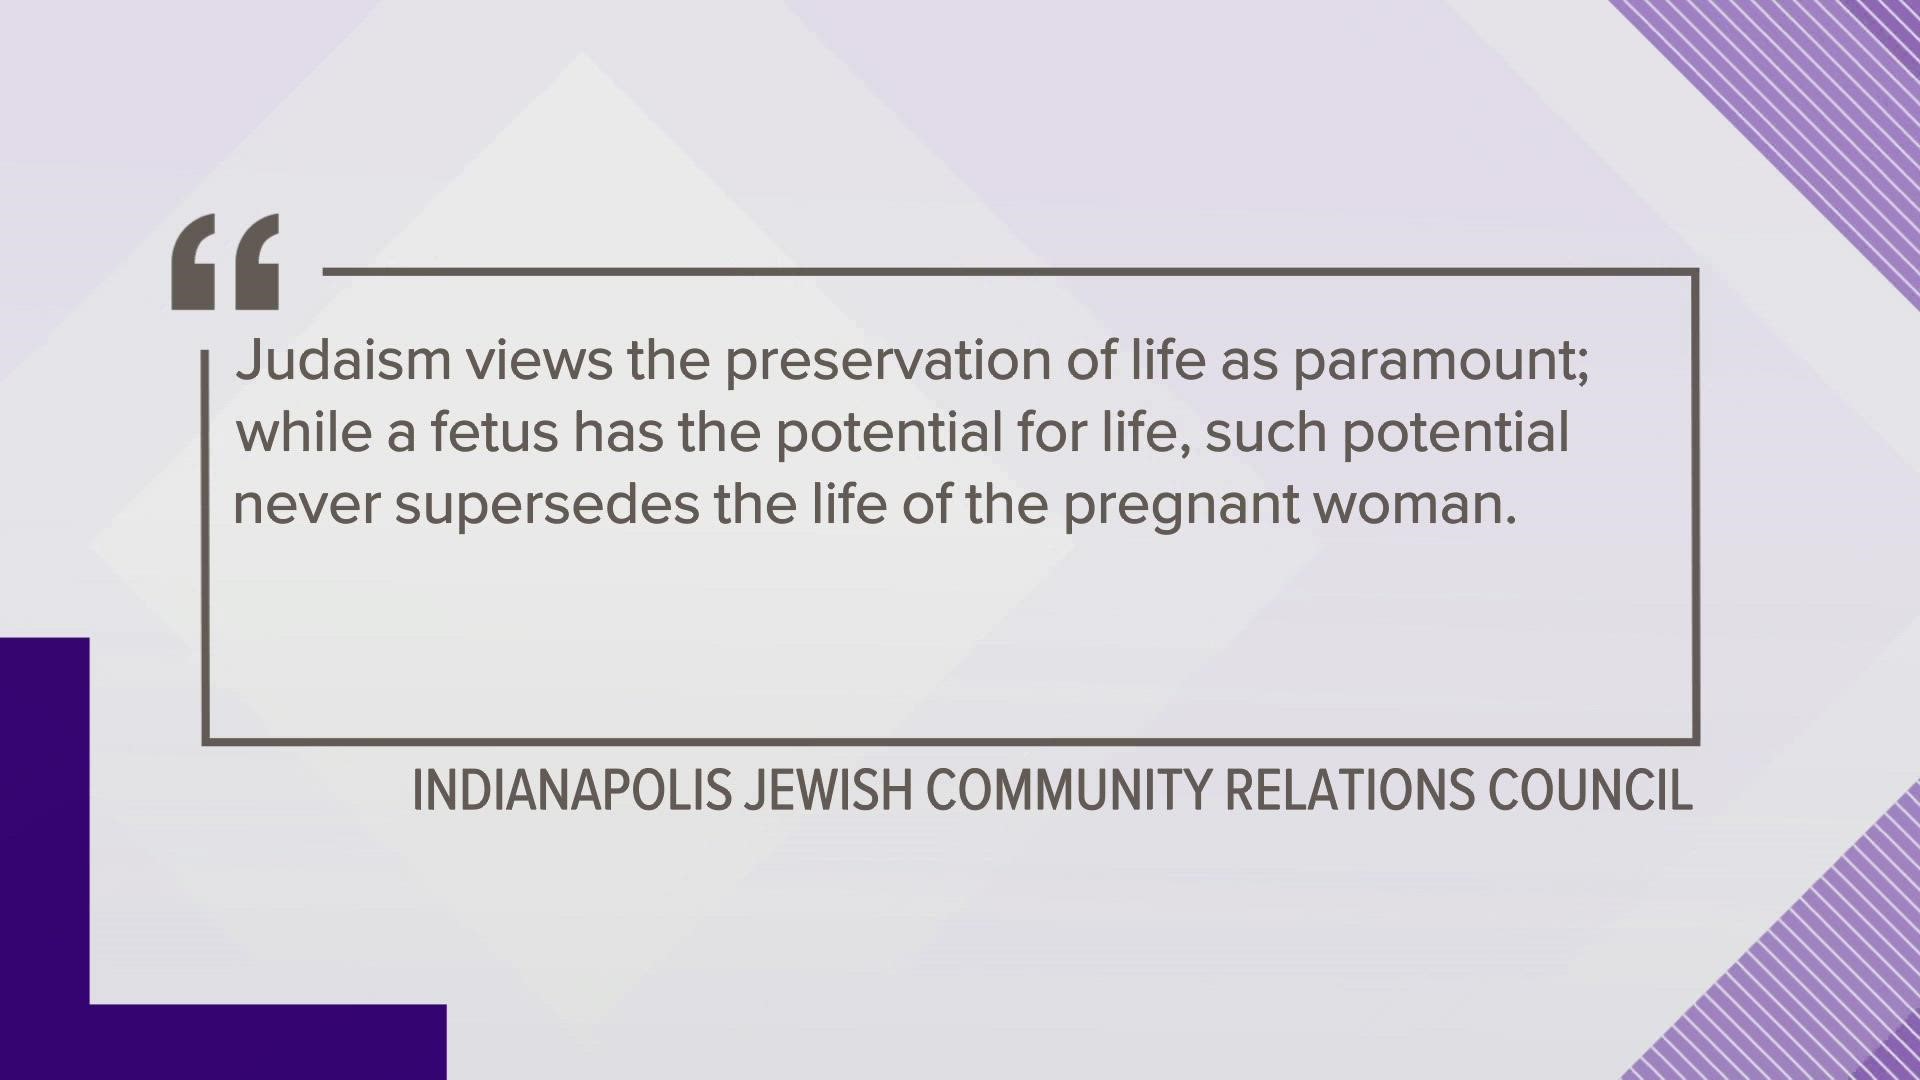 They issued a statement today, saying his remarks on the floor appeared to equate Judaism's views on reproductive rights with condoning murder.